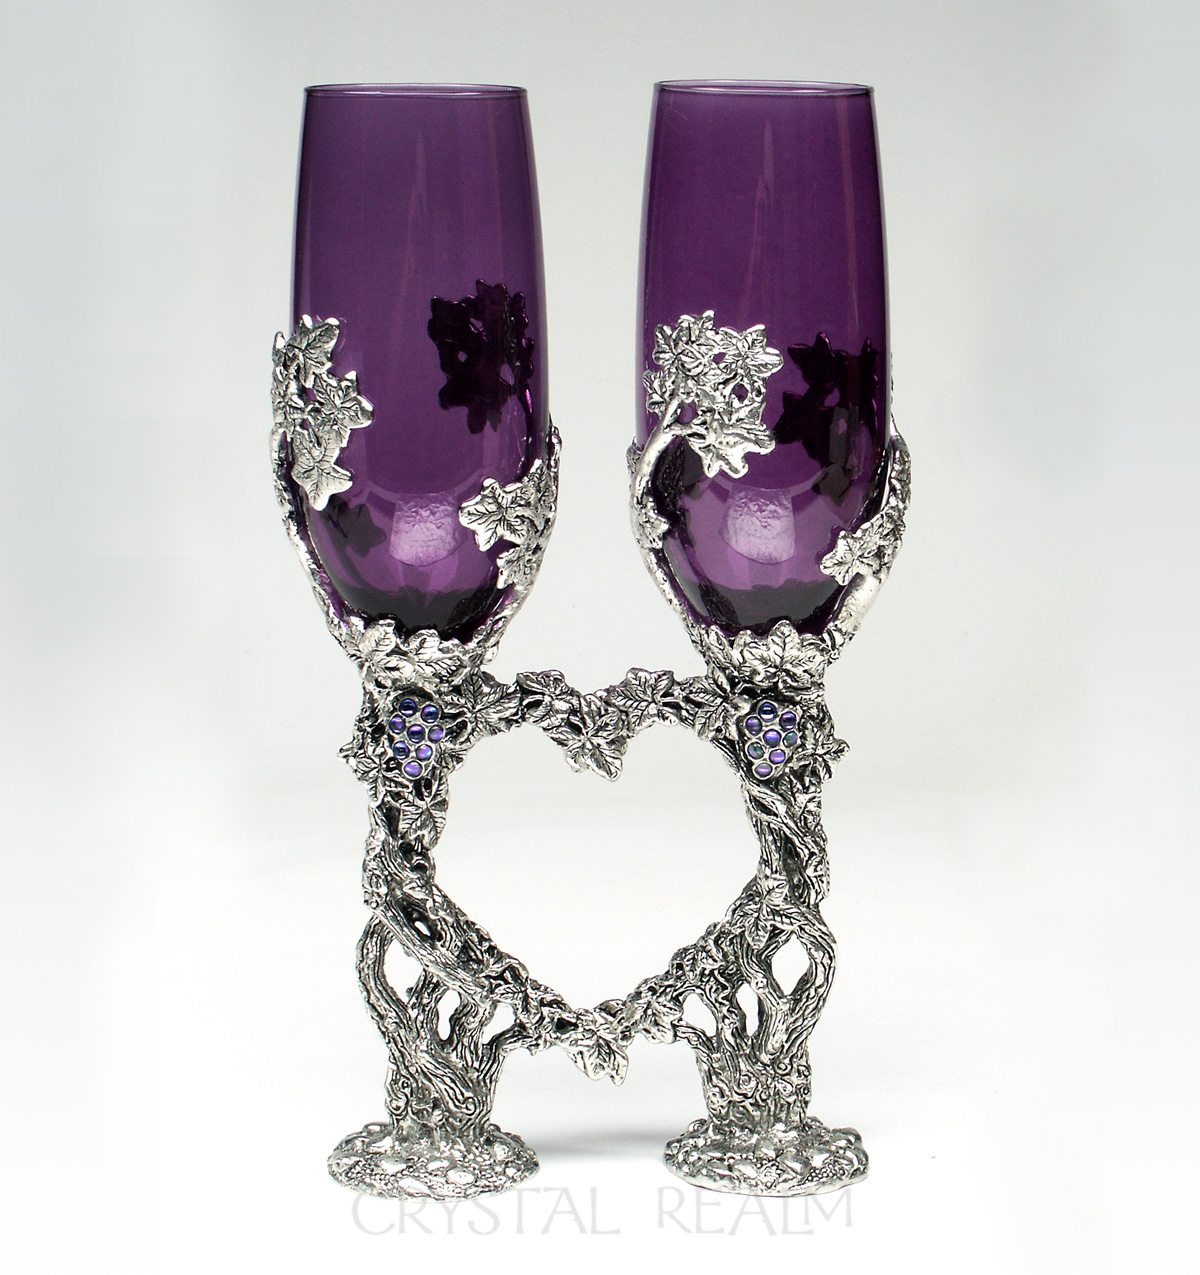 Purple toasting flutes with grapevine stems and Austrian crystal grapes